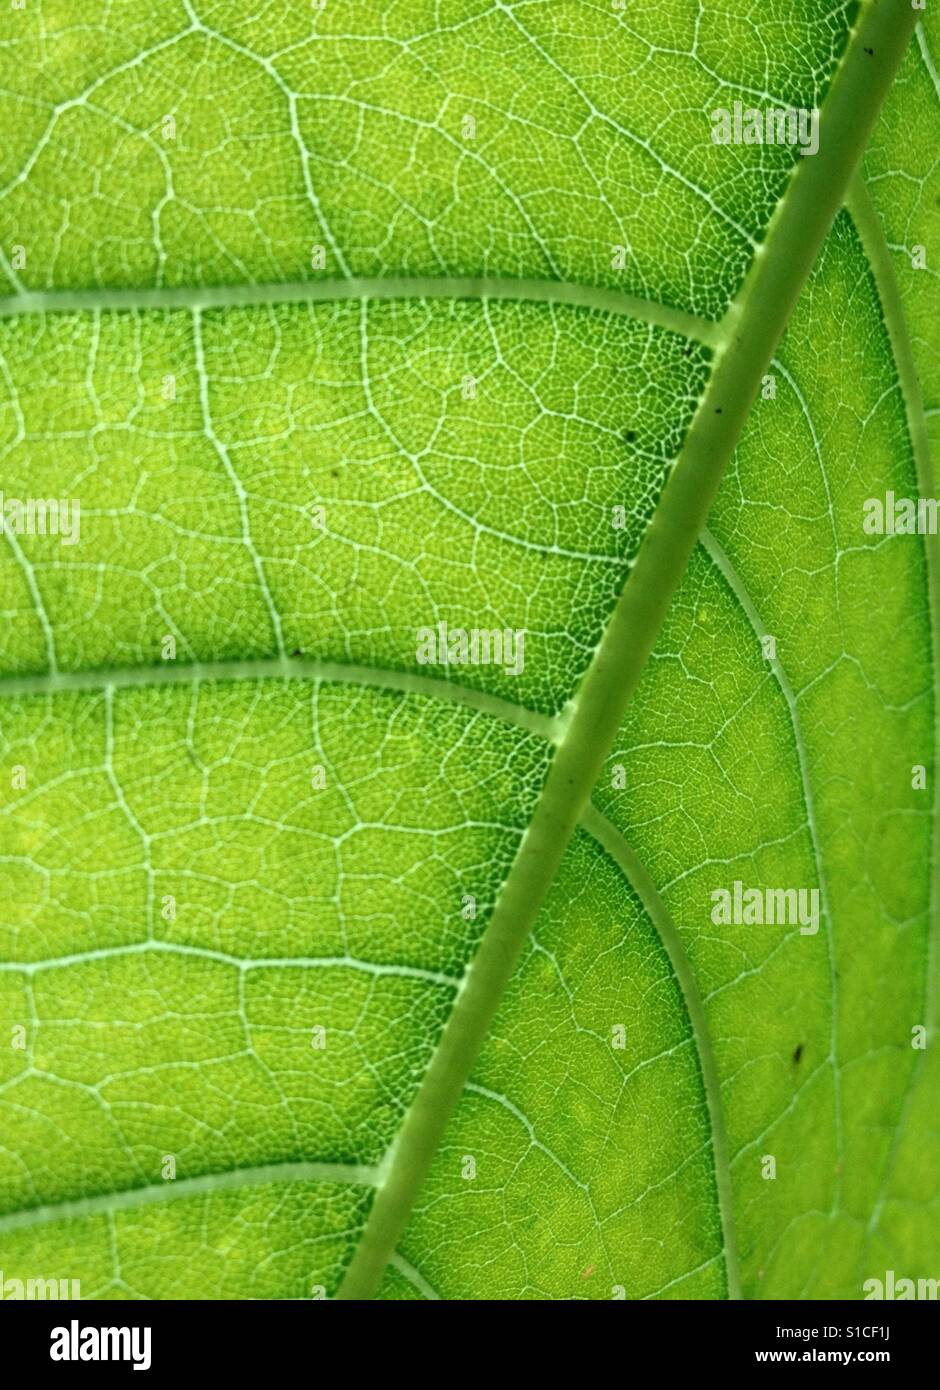 Leaf detail with cells and veins Stock Photo